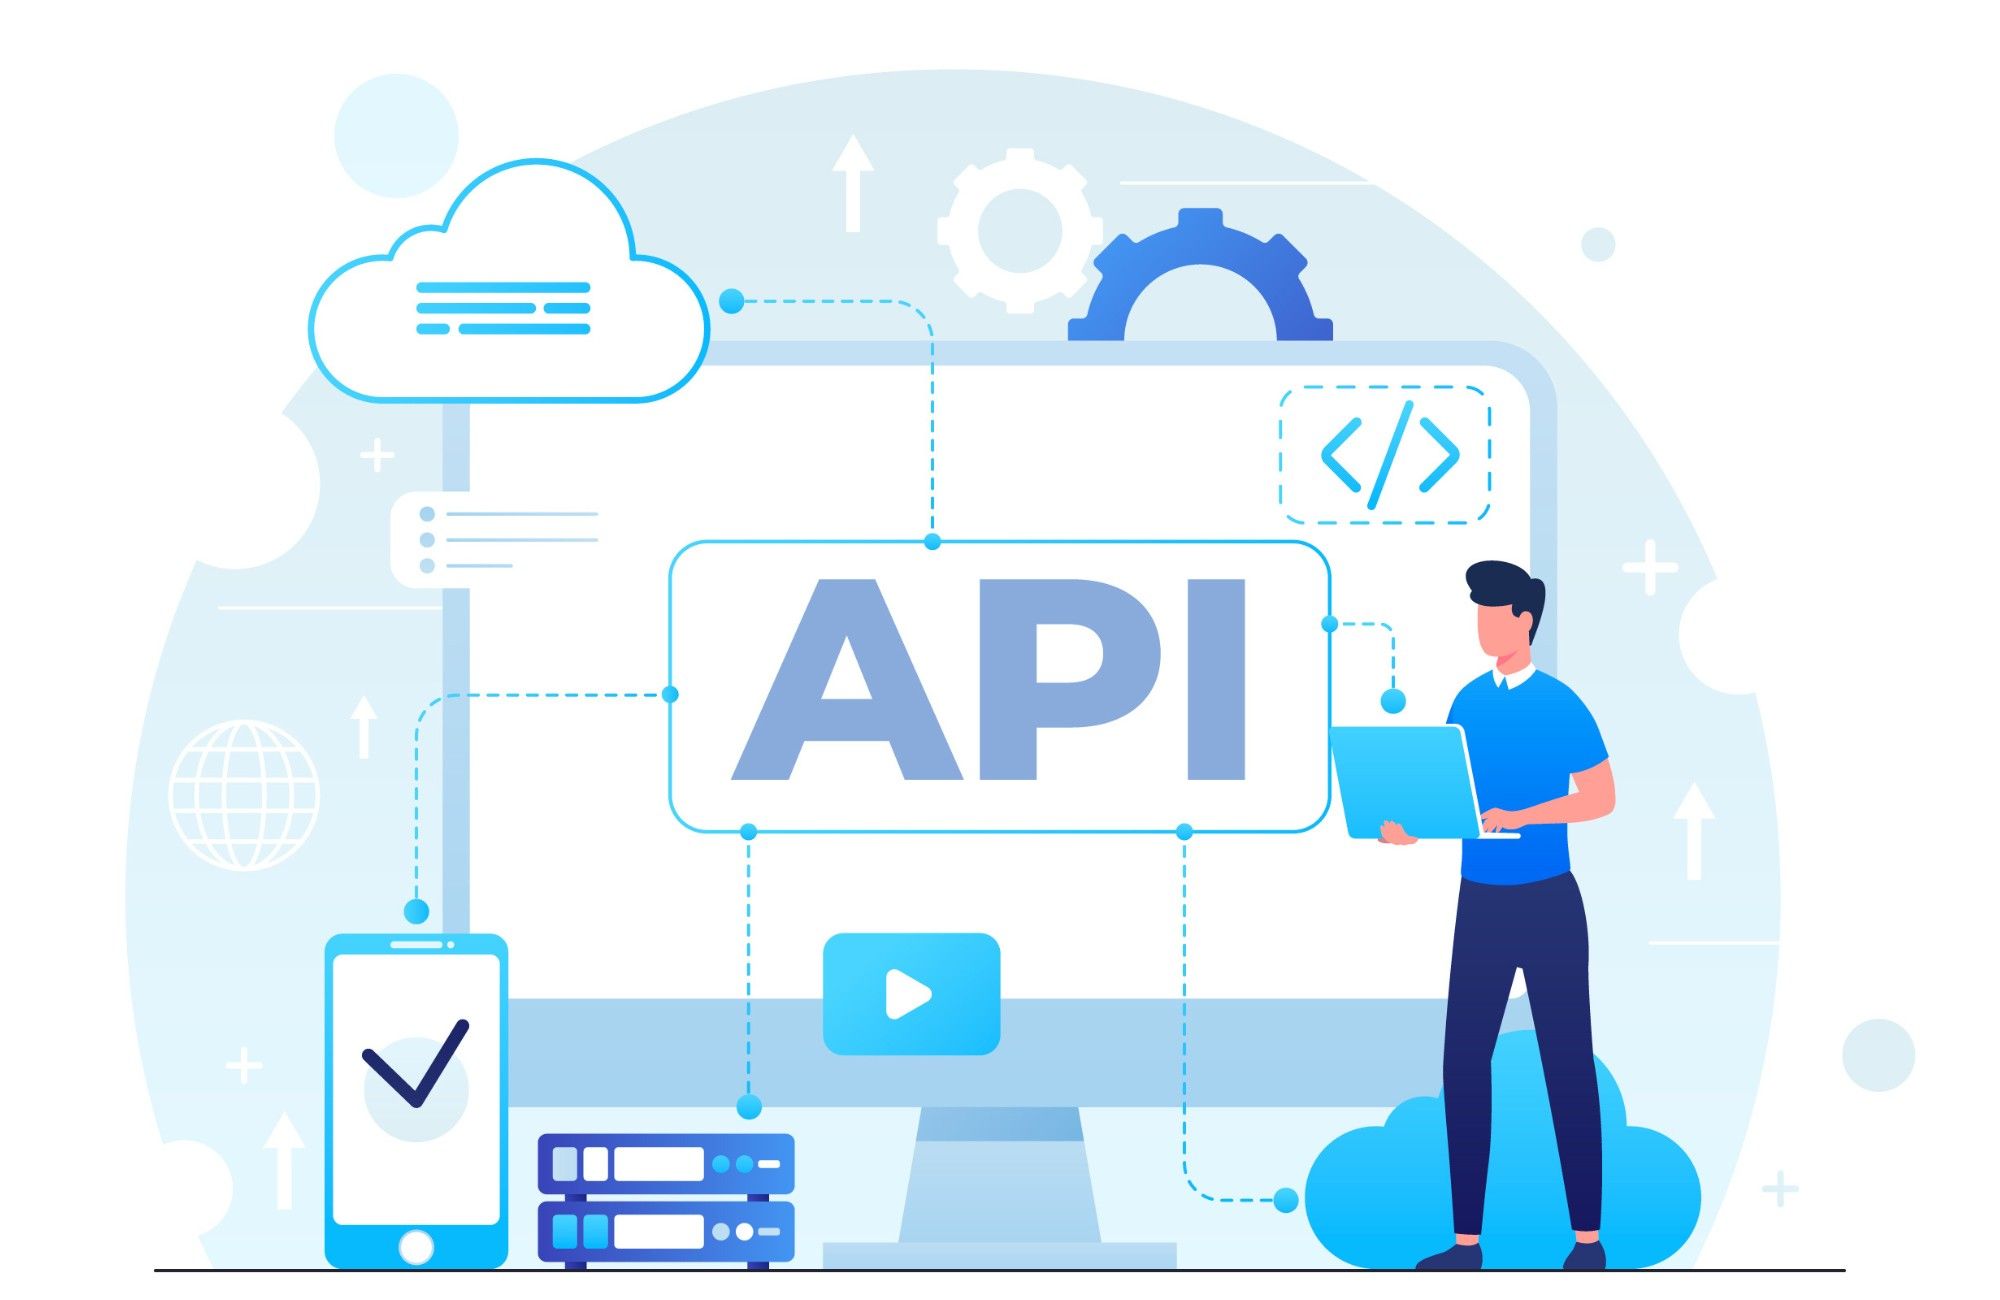 APIs have virtually become the backbone of modern IT systems.